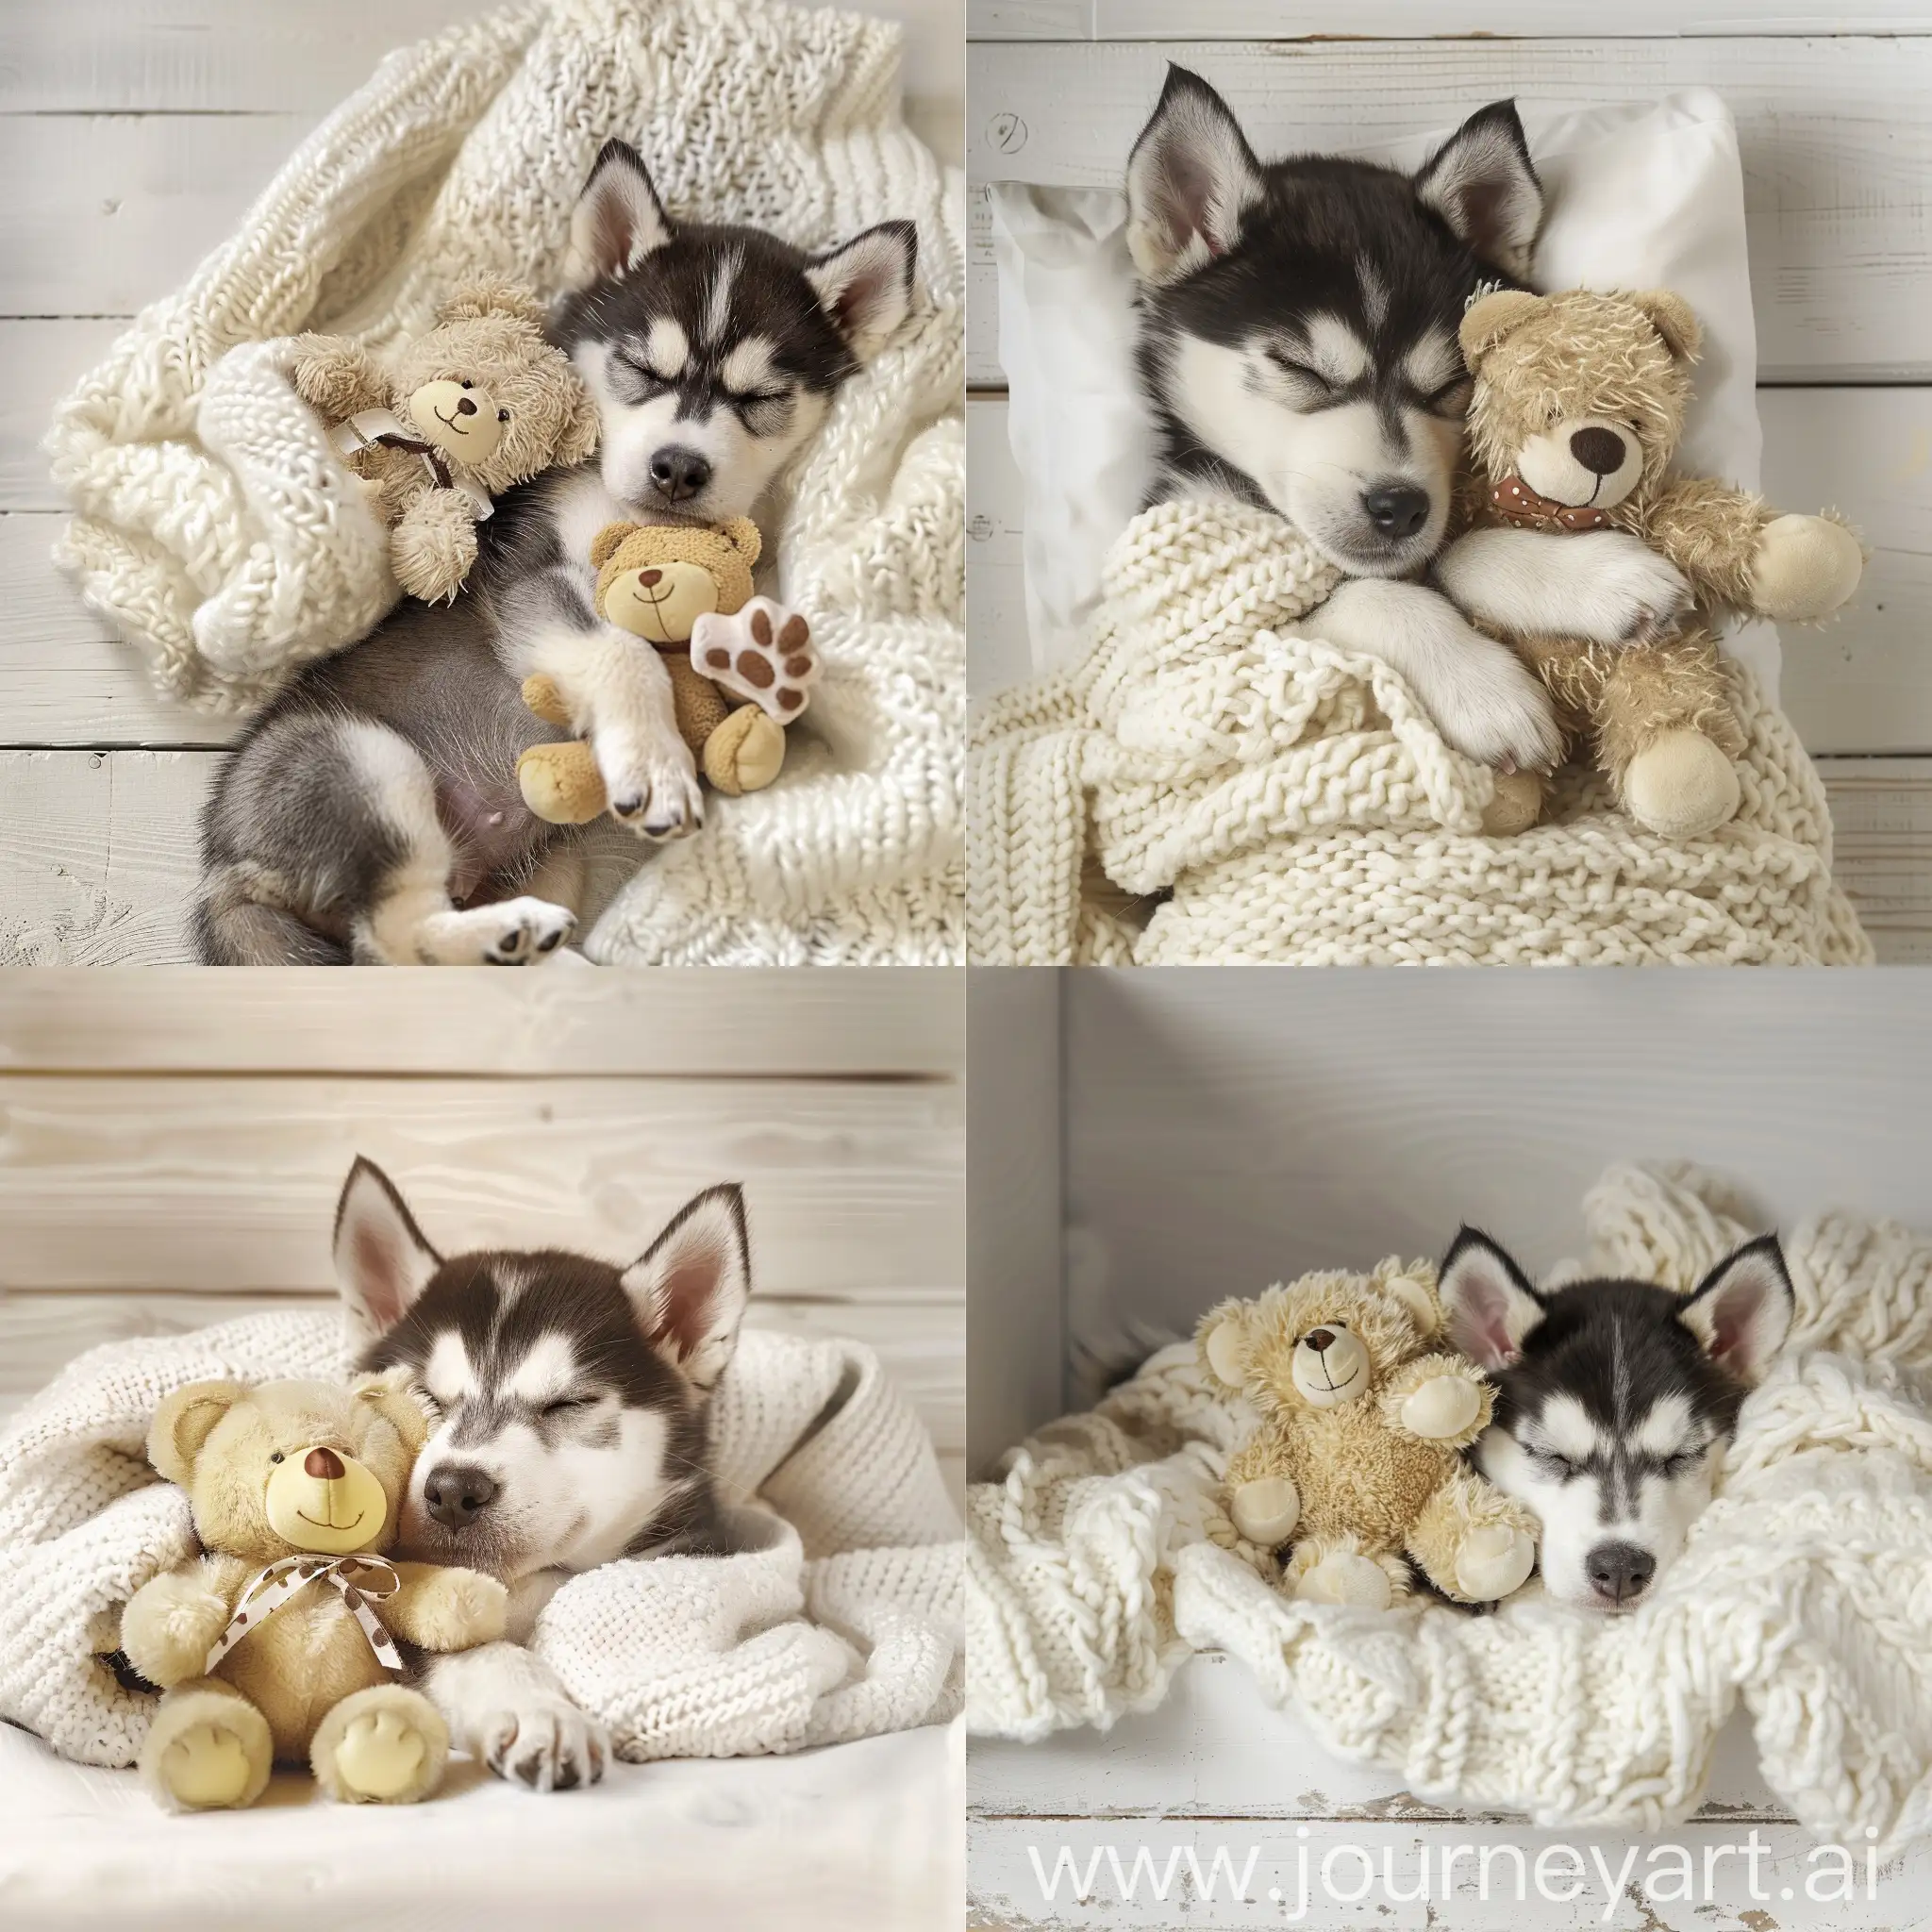 Adorable-Husky-Puppy-Sleeping-with-Teddy-Bear-on-CreamColored-Blanket